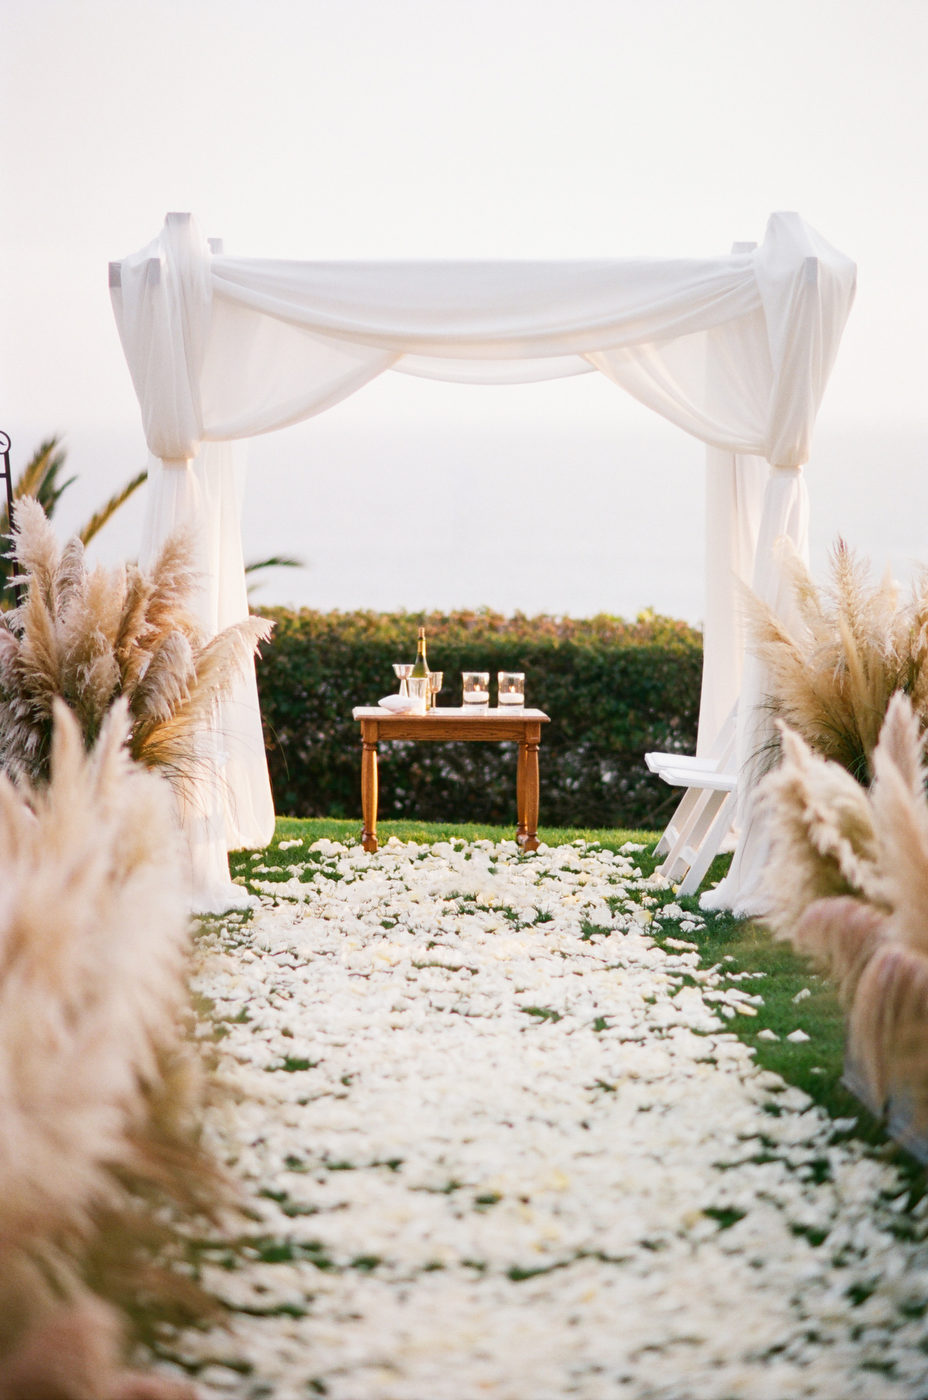 All white minimalist outdoor wedding ceremony with pampas grass aisle decor.